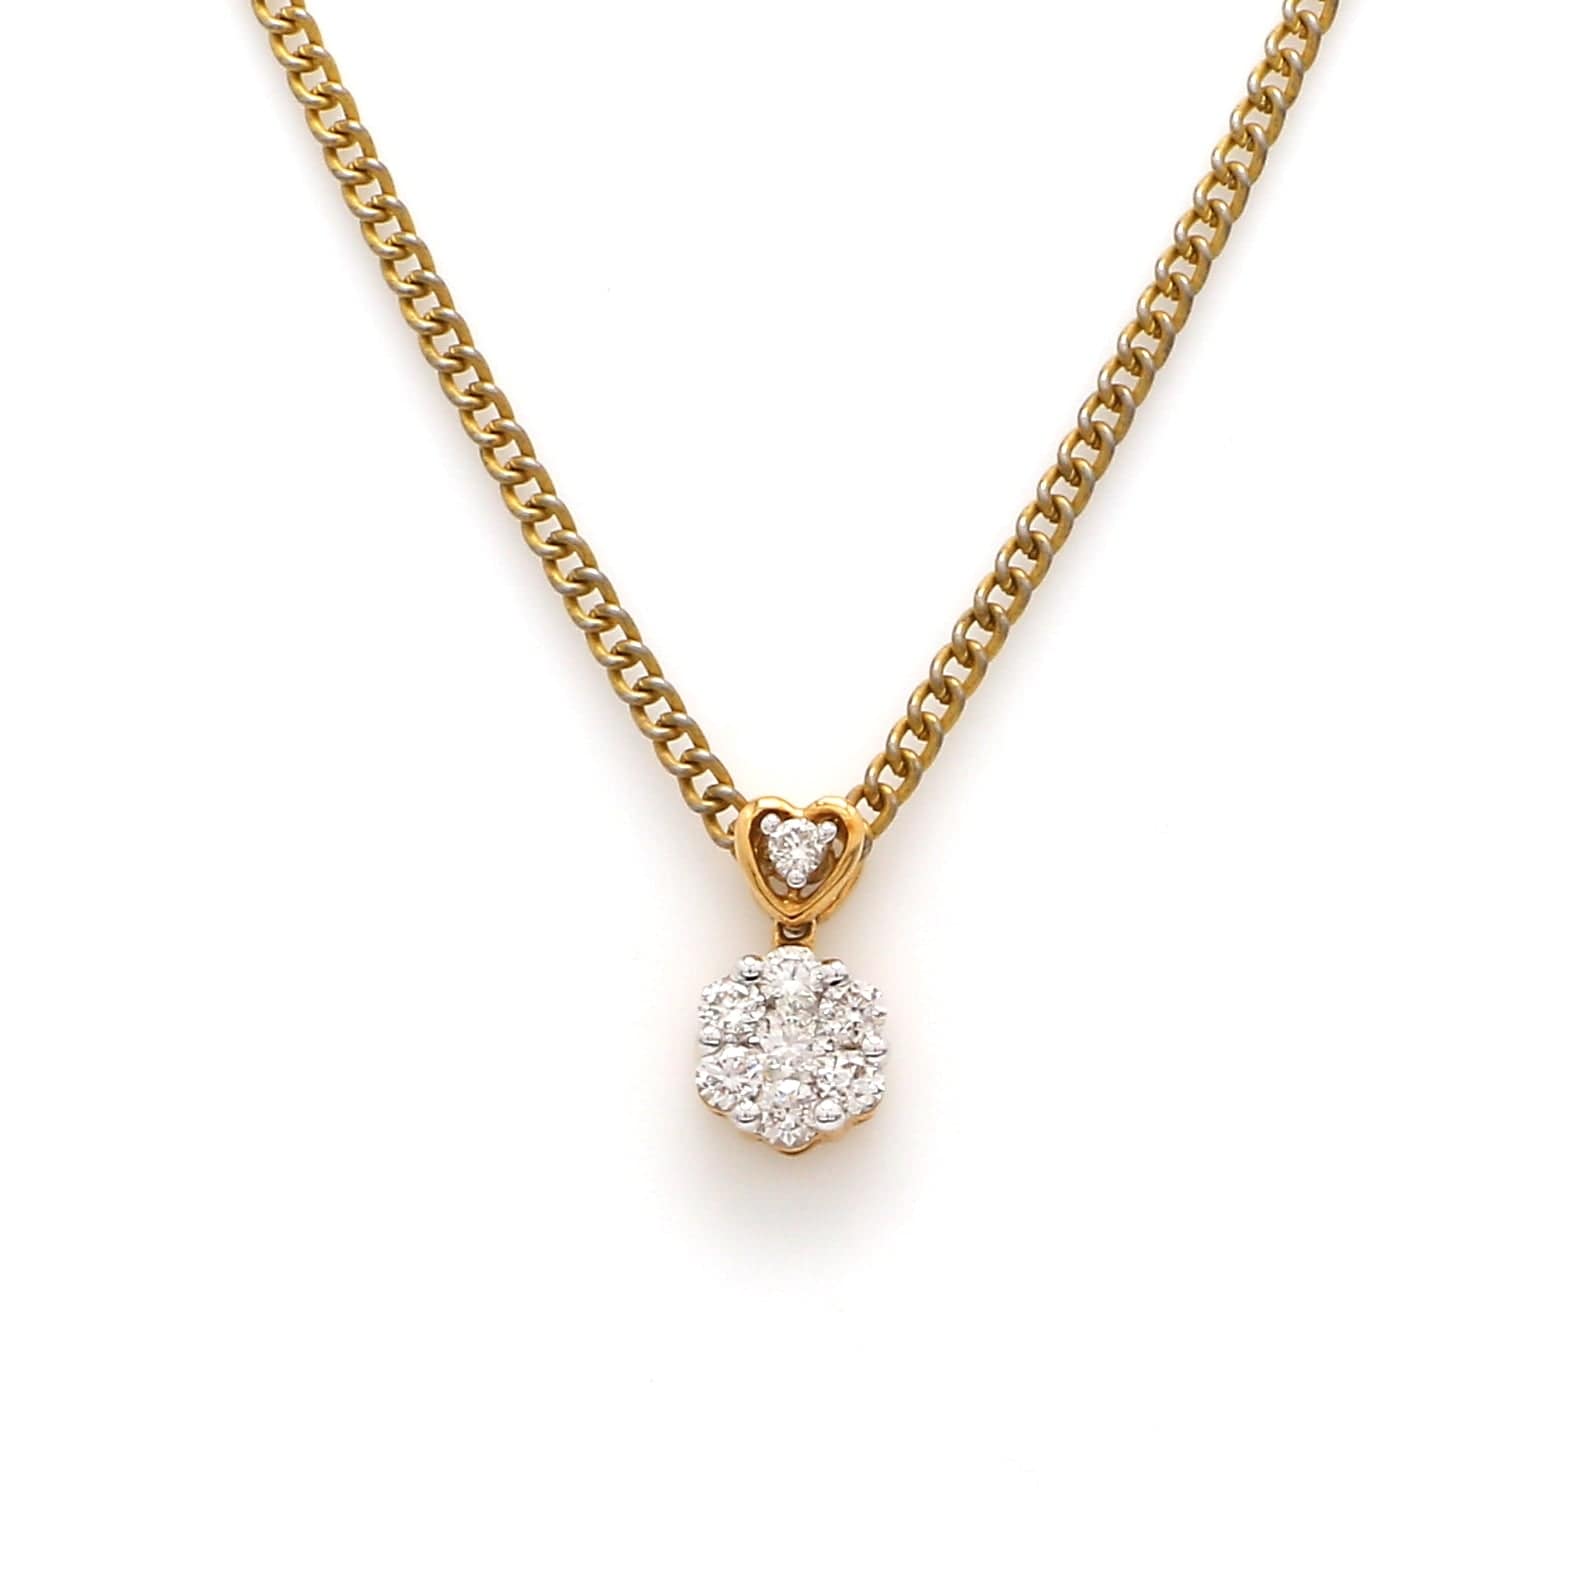 Stunning 3 Carat Pear Shaped Diamond Necklace In Yellow Gold